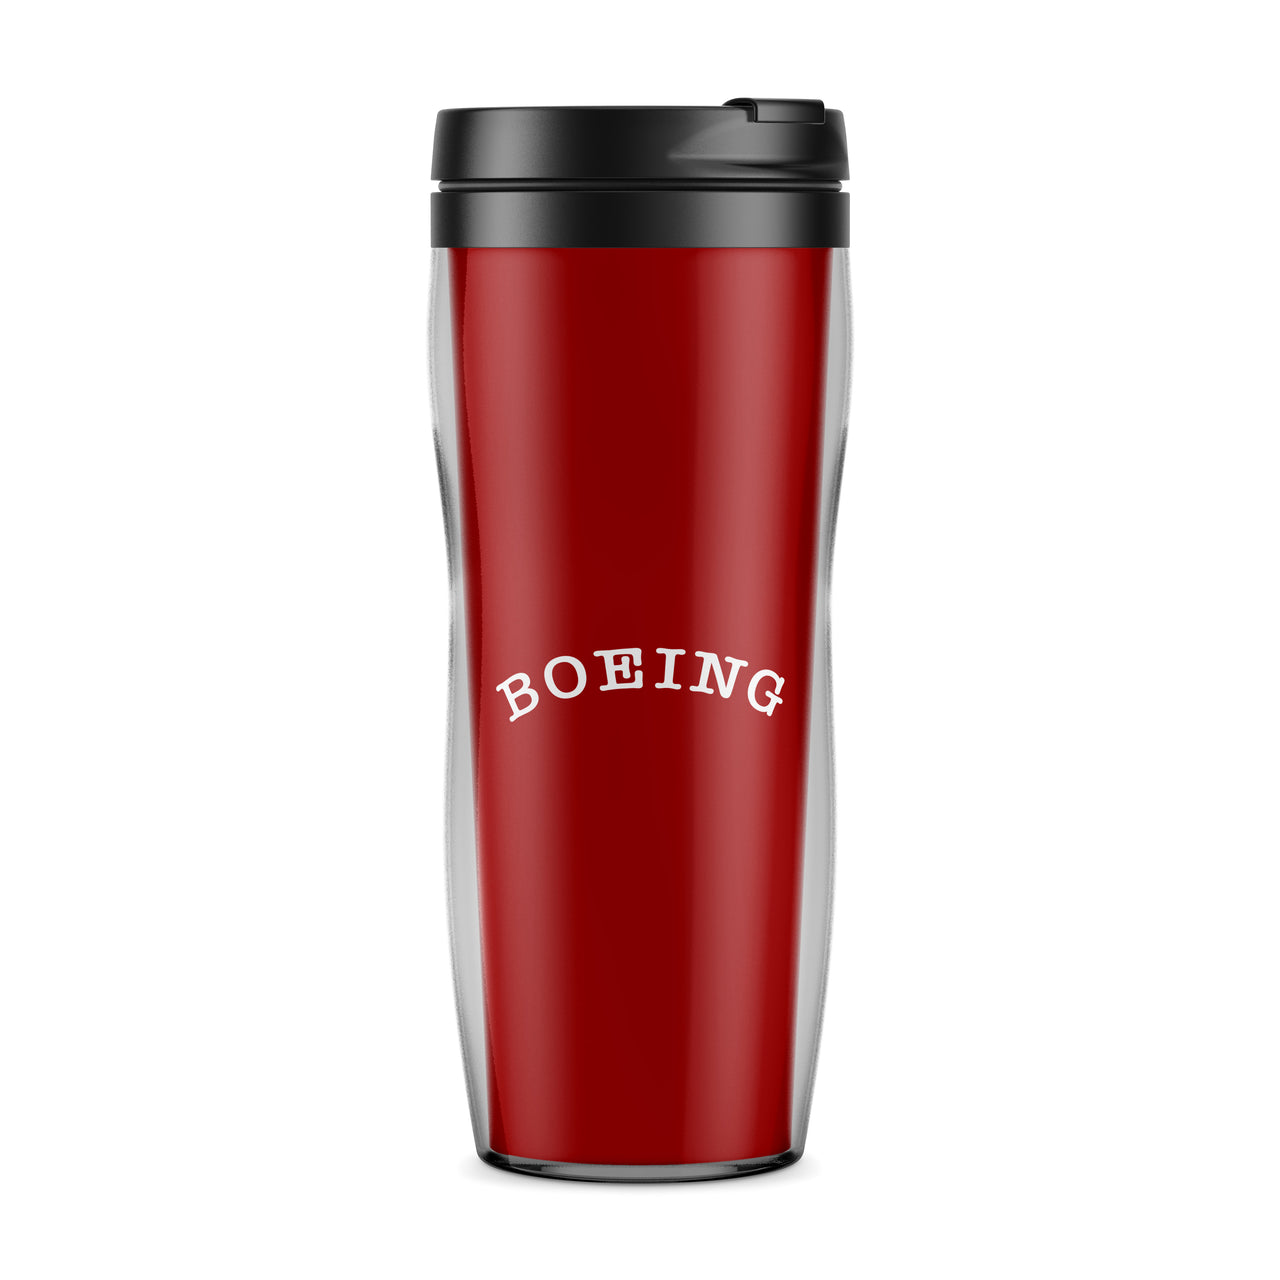 Special BOEING Text Designed Travel Mugs